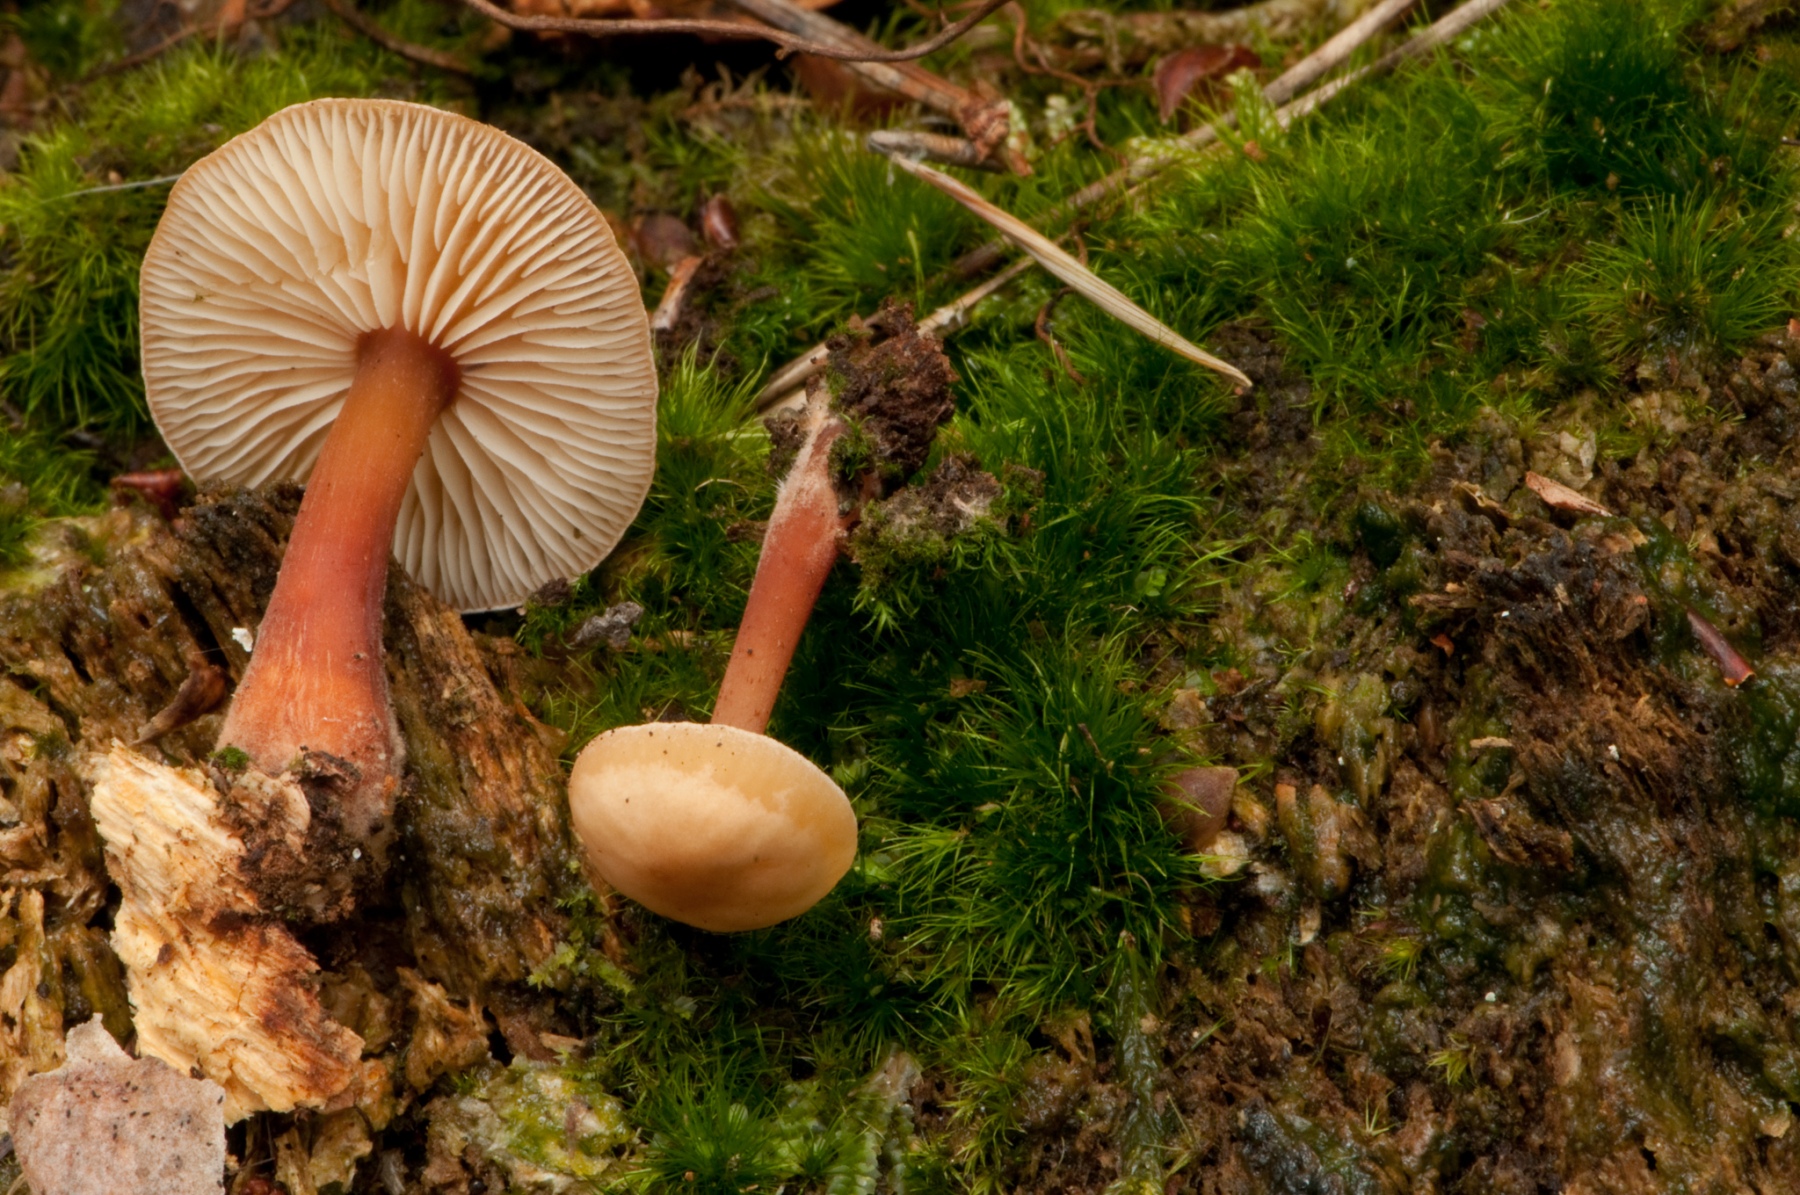 Collybia erythropus, Clumber Park, Notts. Photo by Les Coe